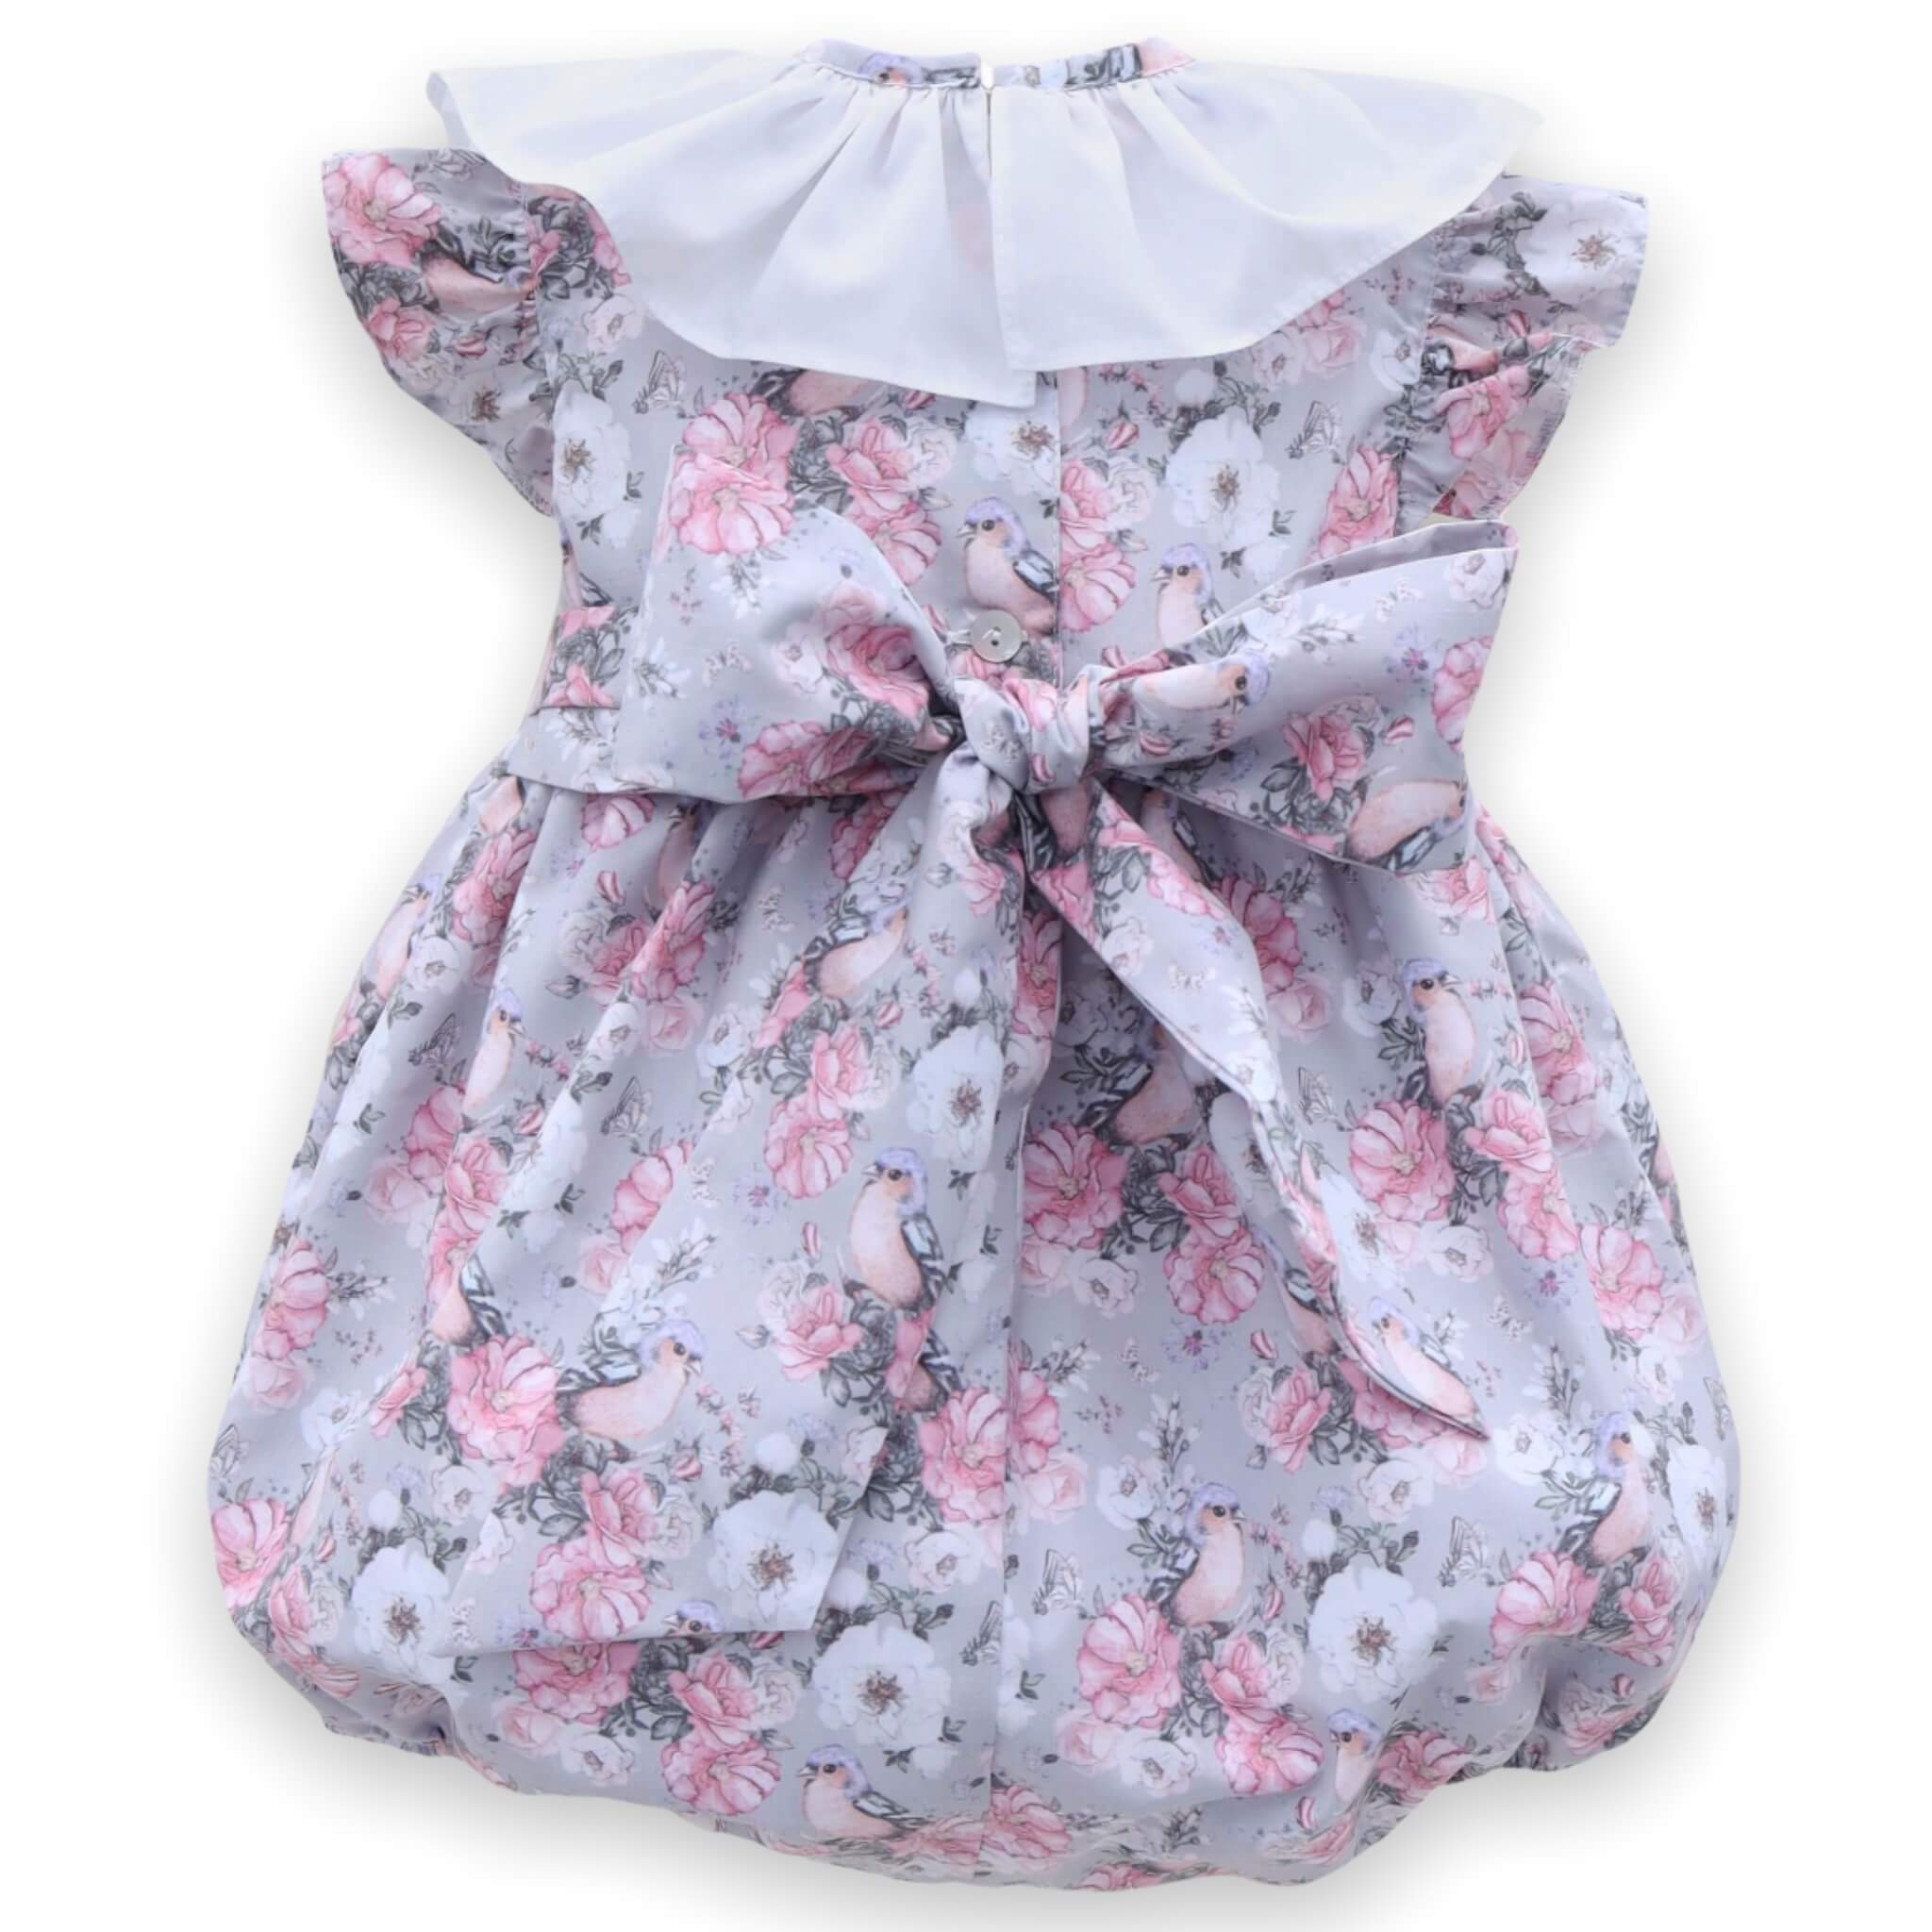 floral classic smocked baby girl romper with bow